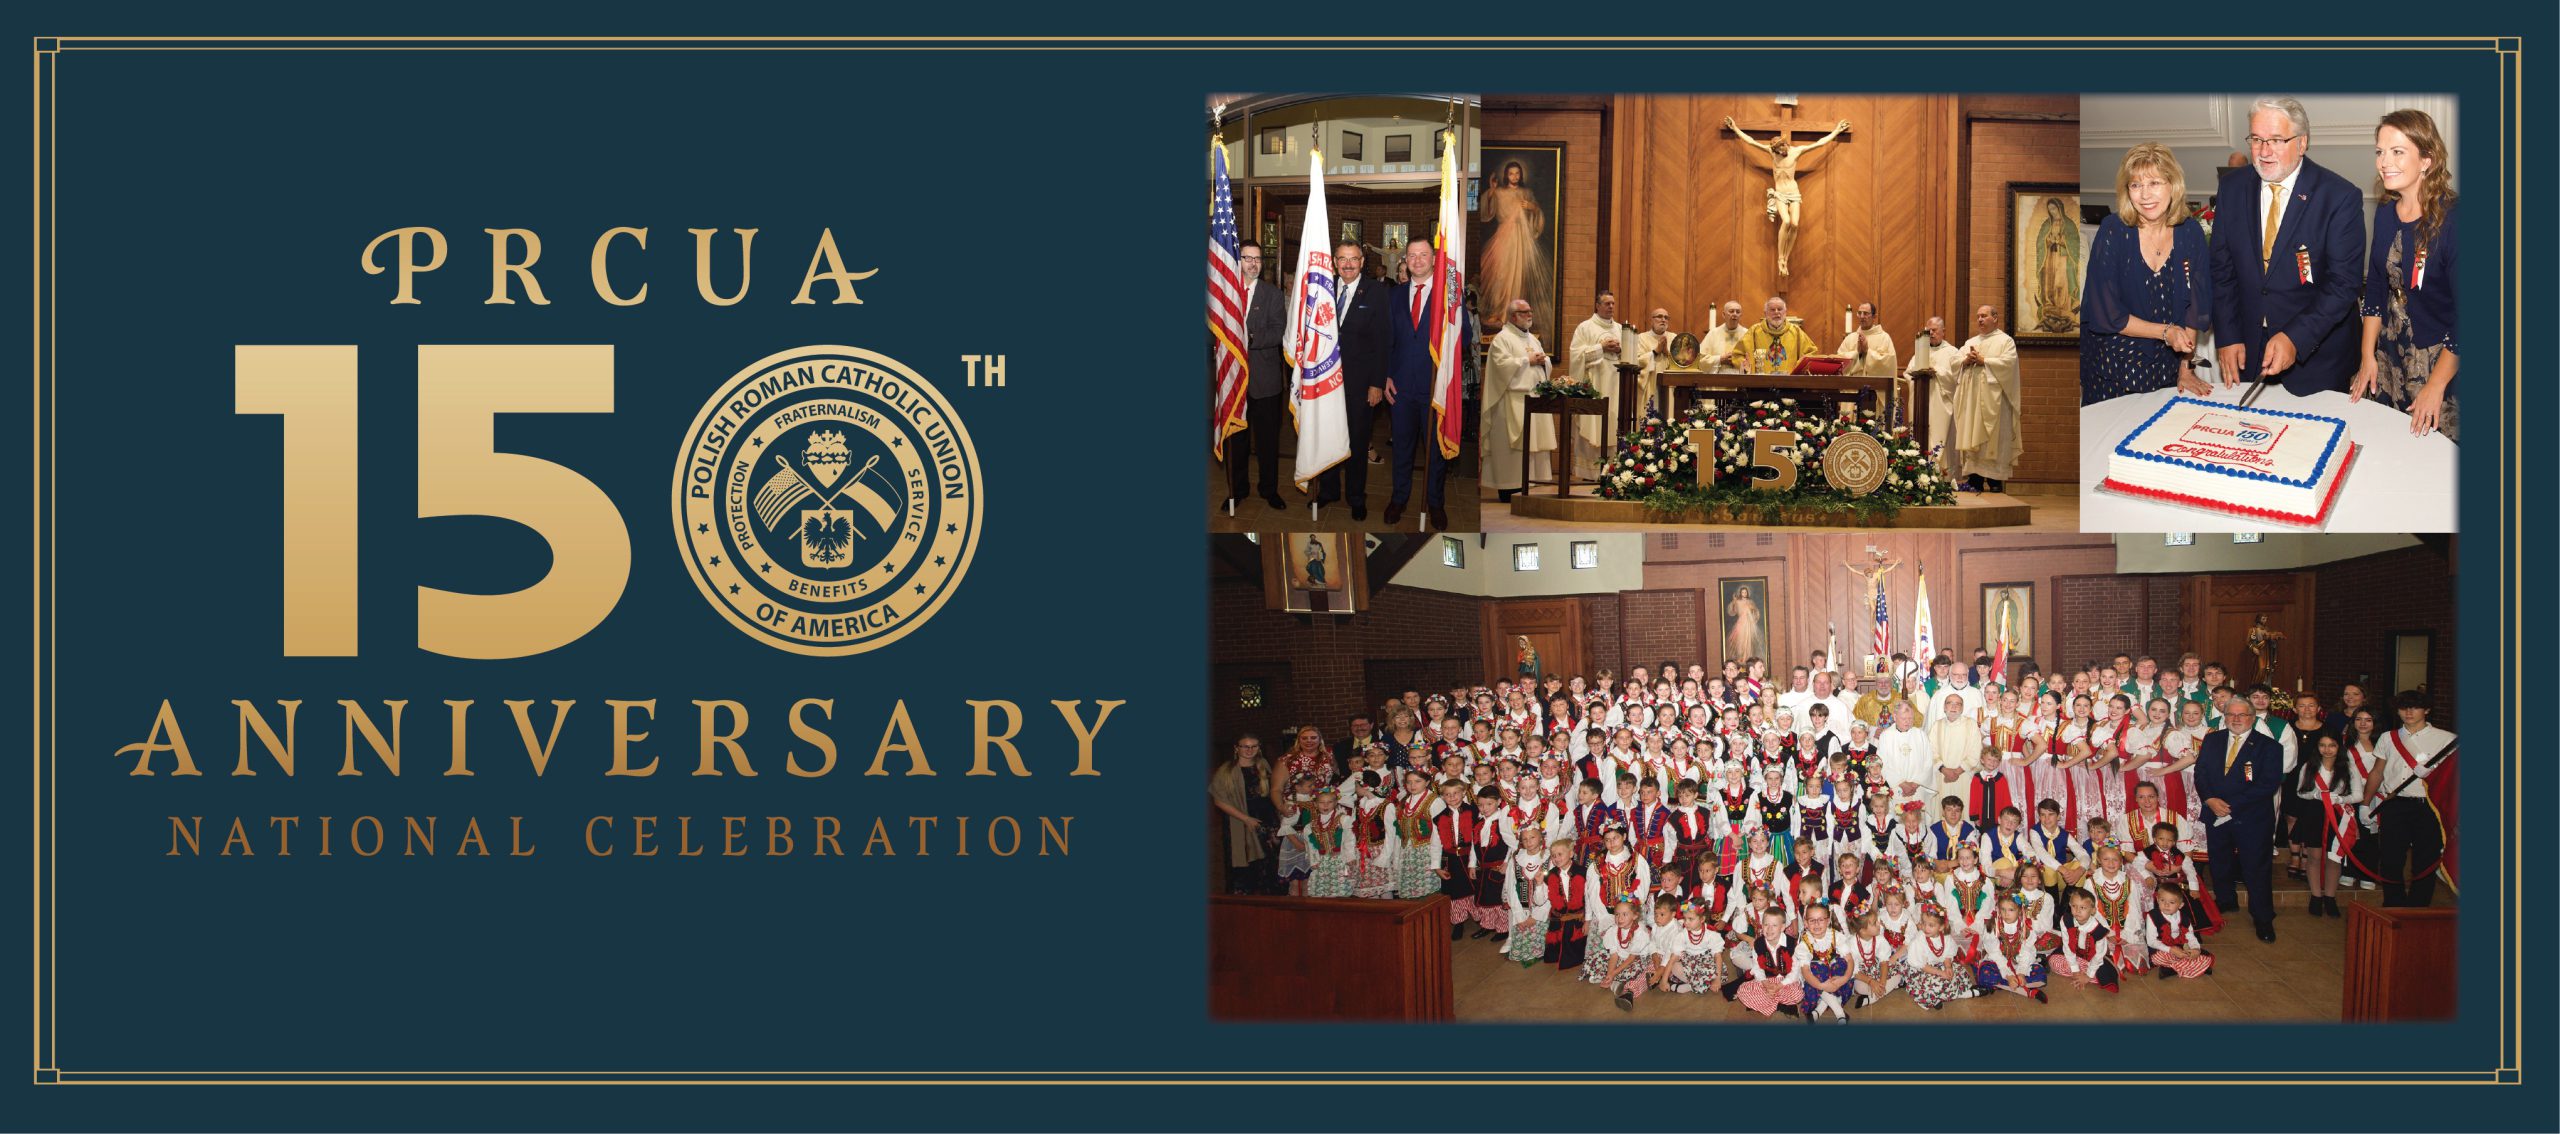 The PRCUA 150 National Celebration Booklet